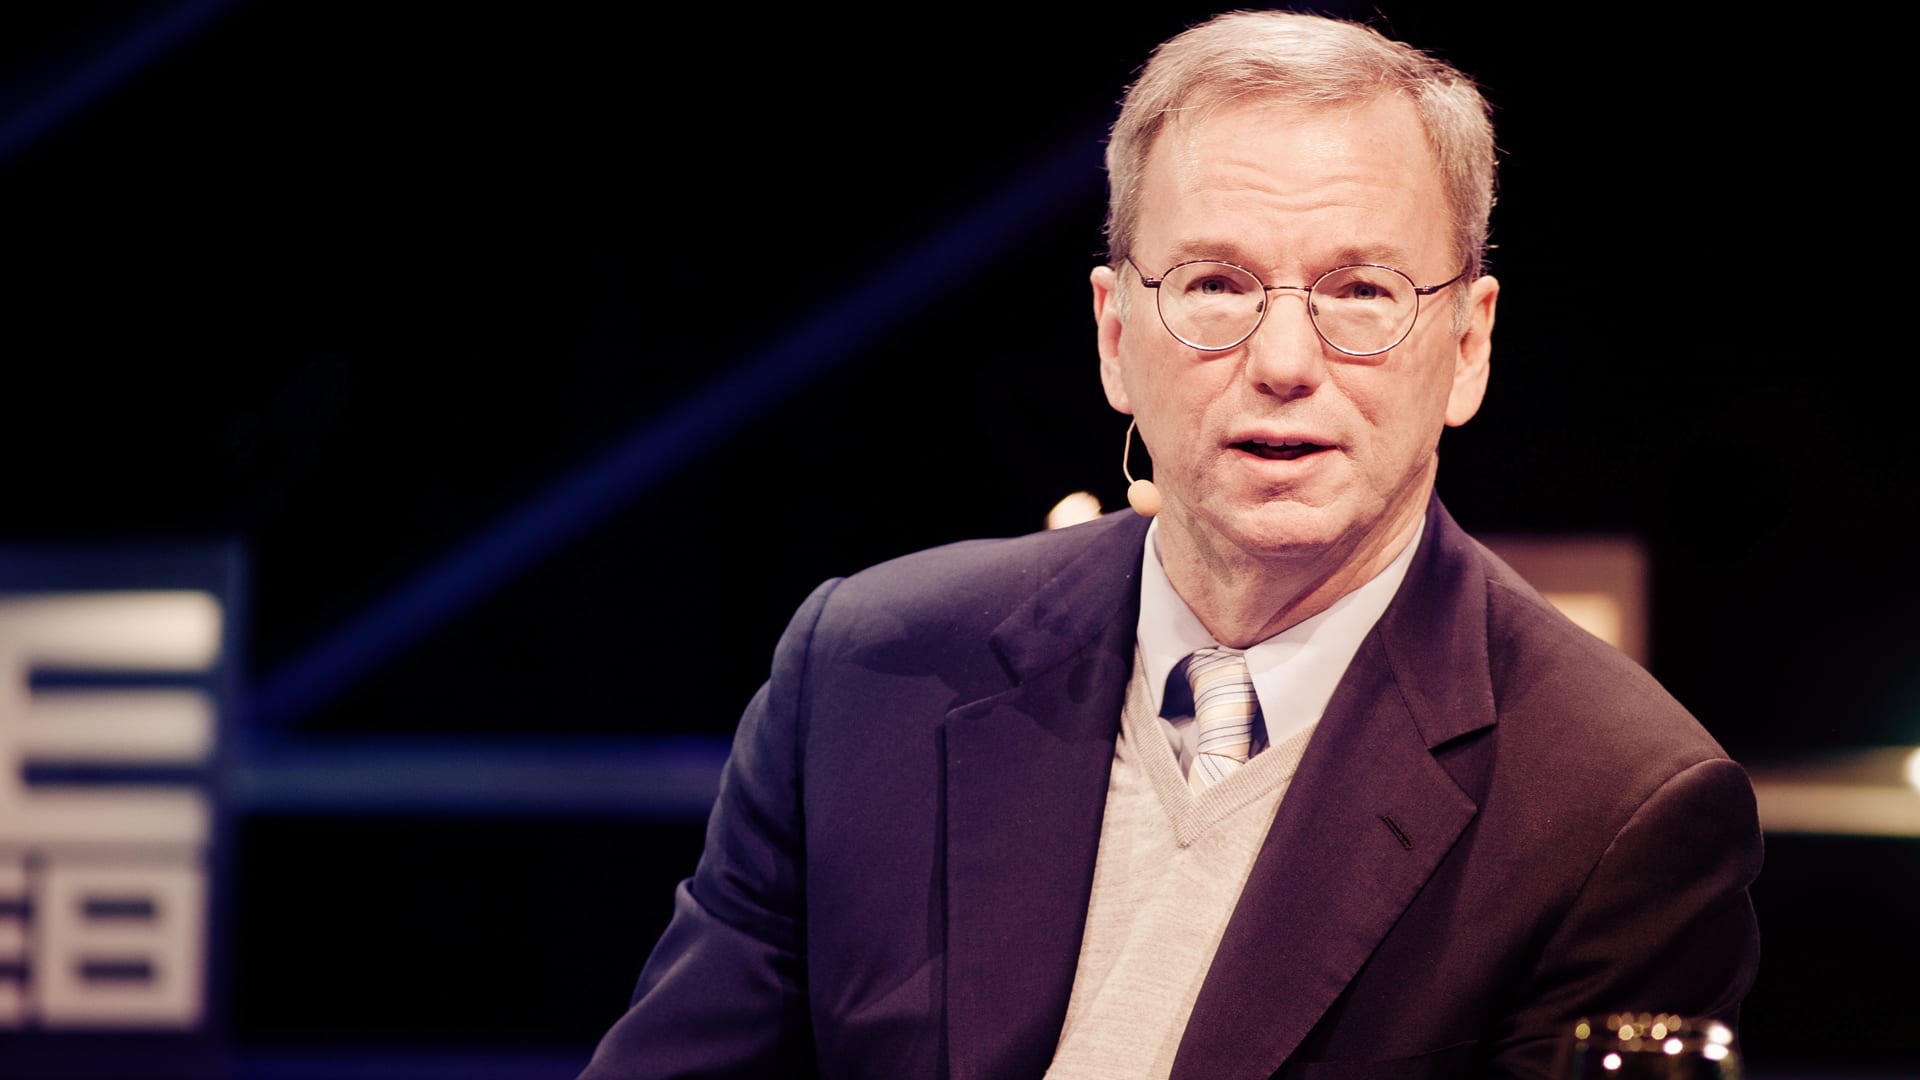 Google’s Eric Schmidt accidentally discovers labor unions